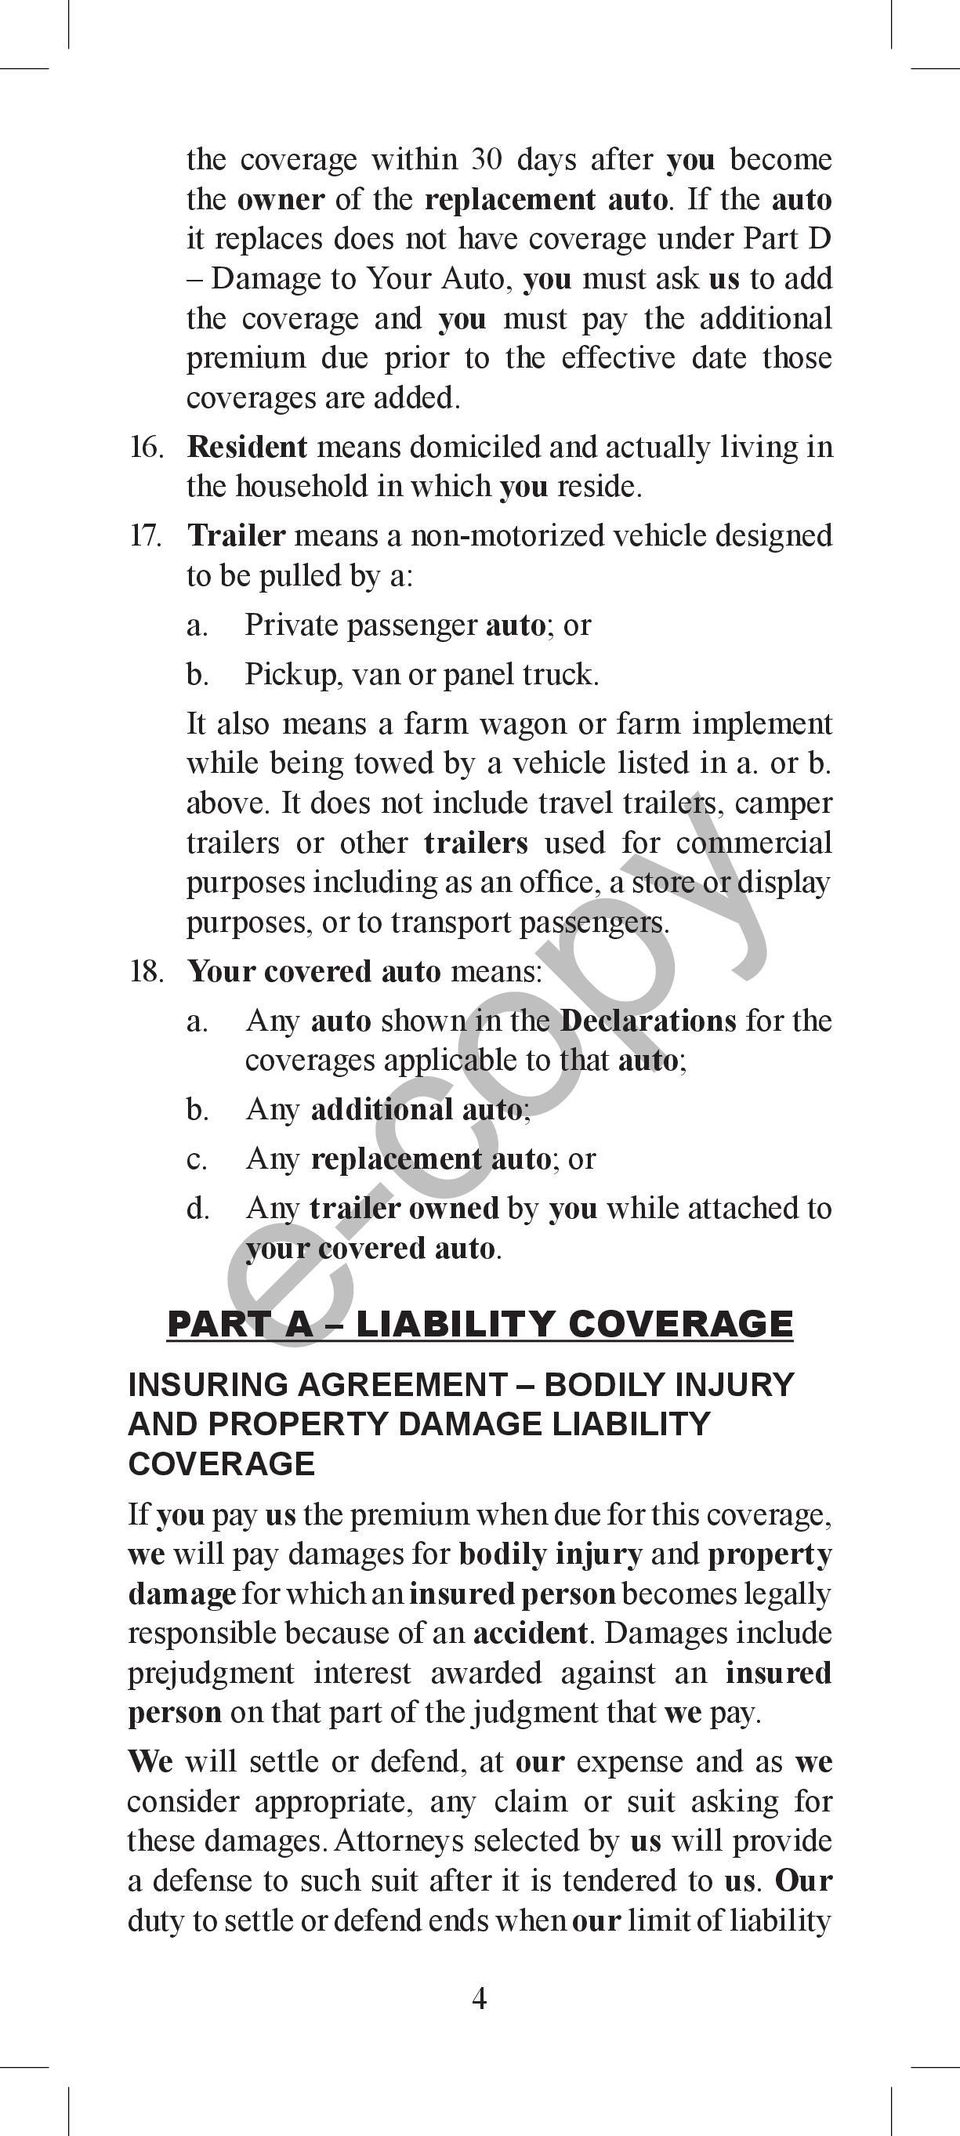 coverages are added. 16. Resident means domiciled and actually living in the household in which you reside. 17. Trailer means a non-motorized vehicle designed to be pulled by a: a.